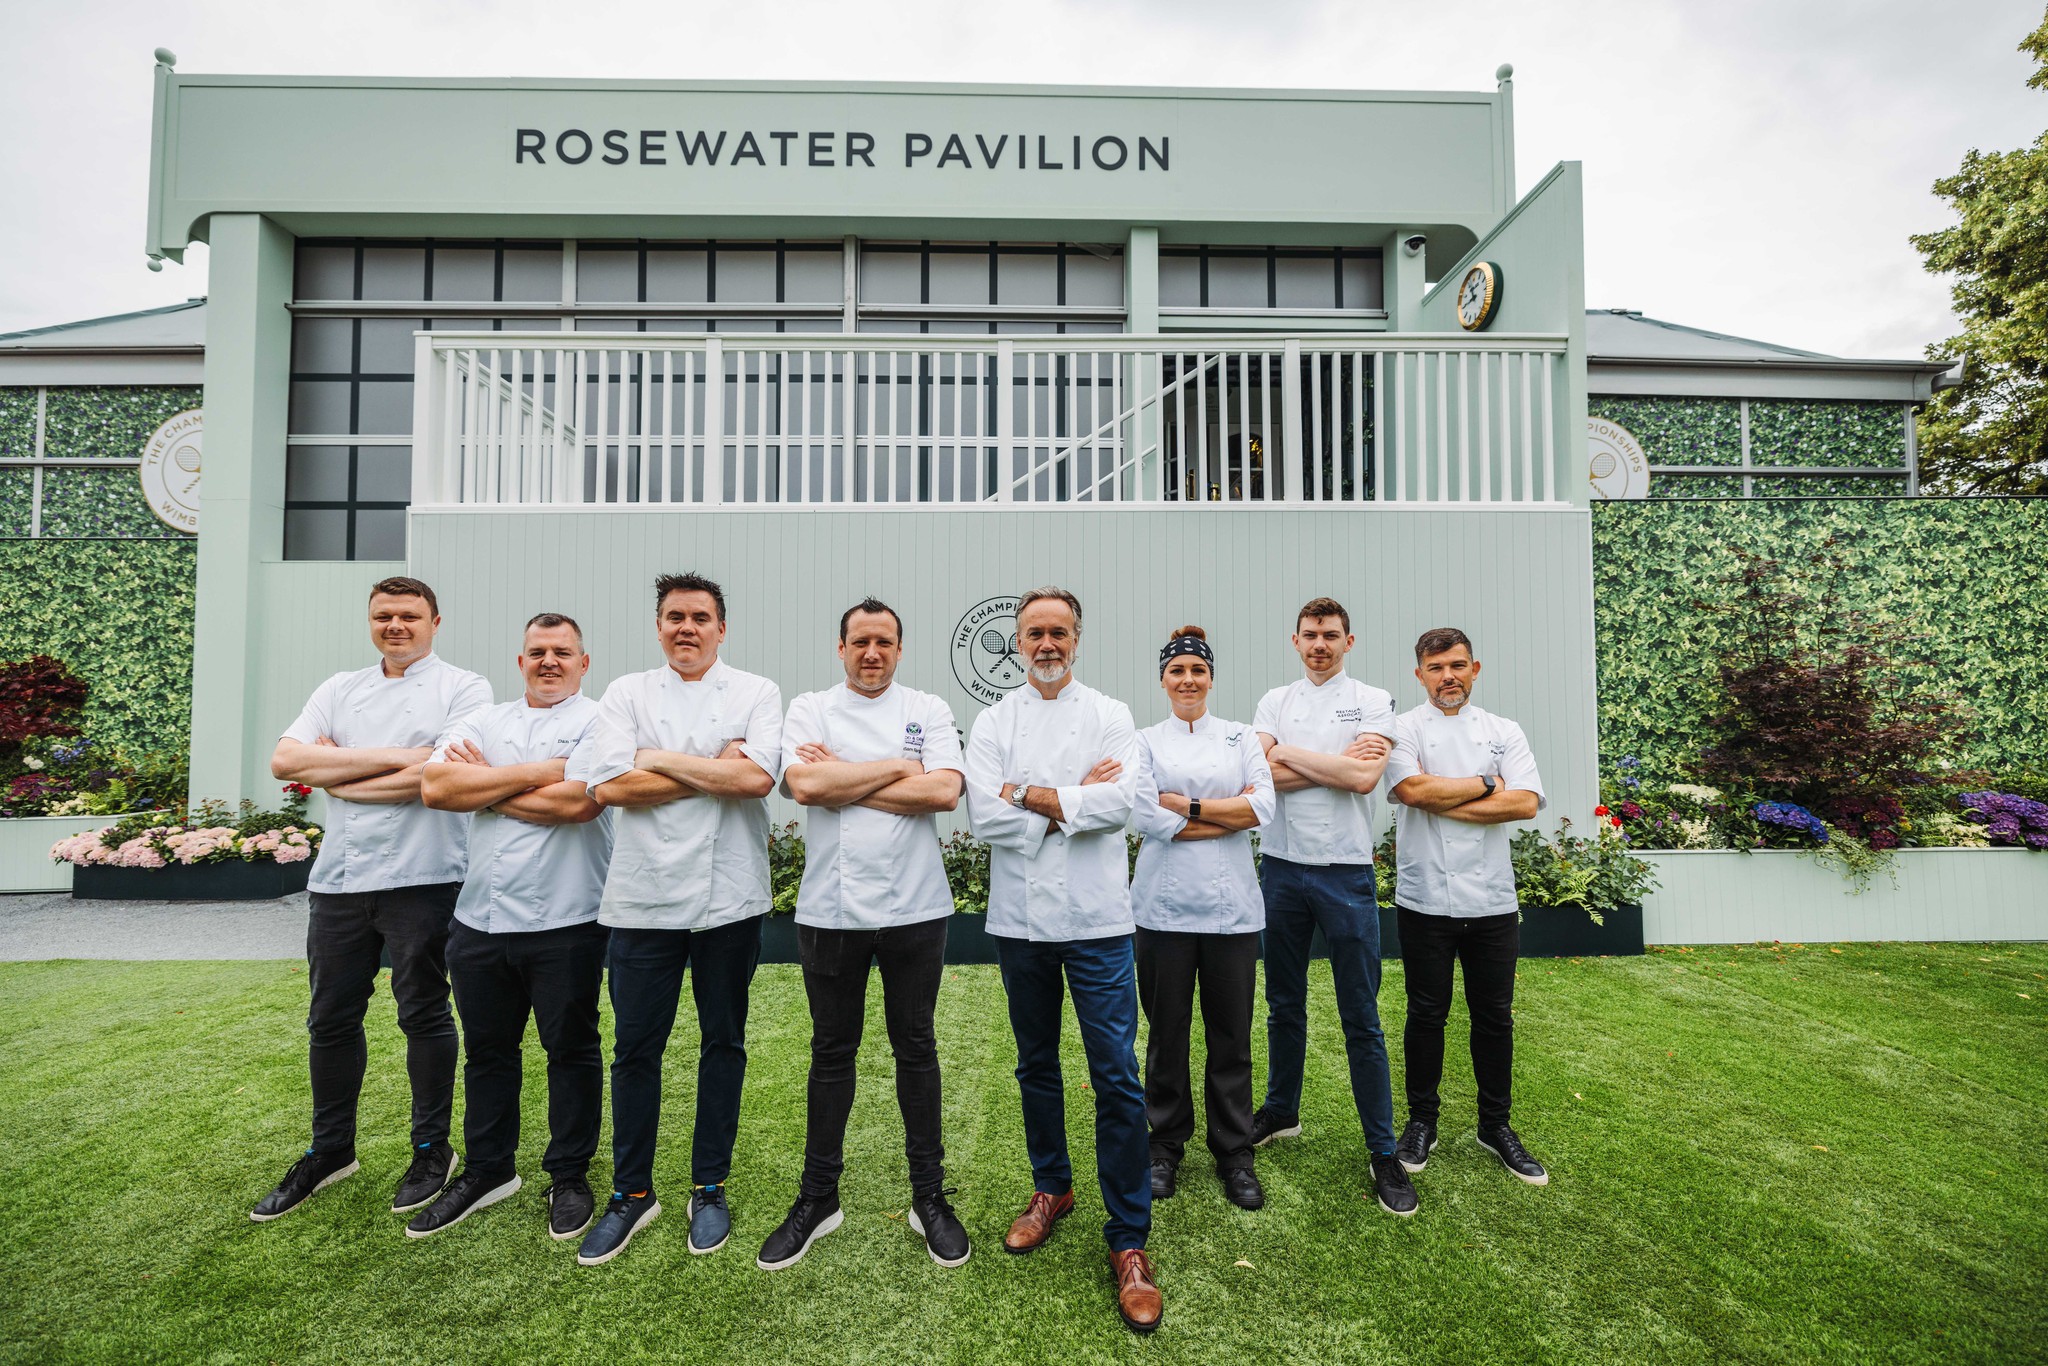 Eight chefs standing in front of the Rosewater Pavilion at 2023 Wimbledon Championships